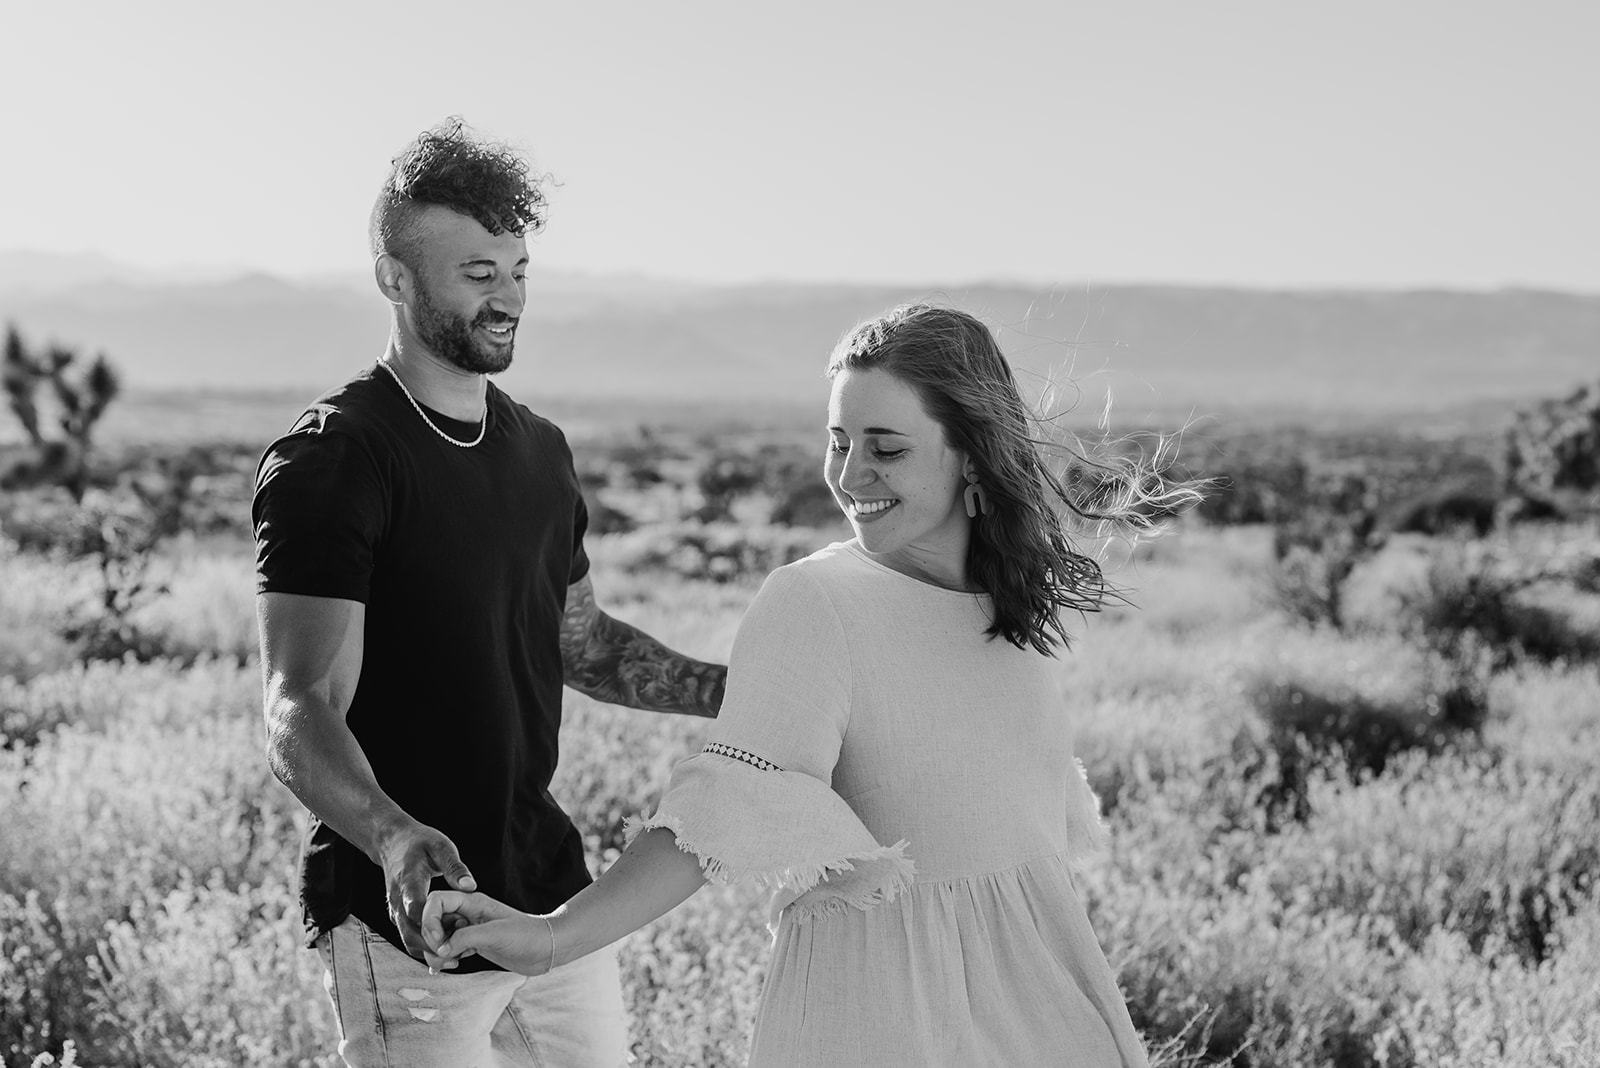 Time stands still in black and white desert image of couple during their engagement session